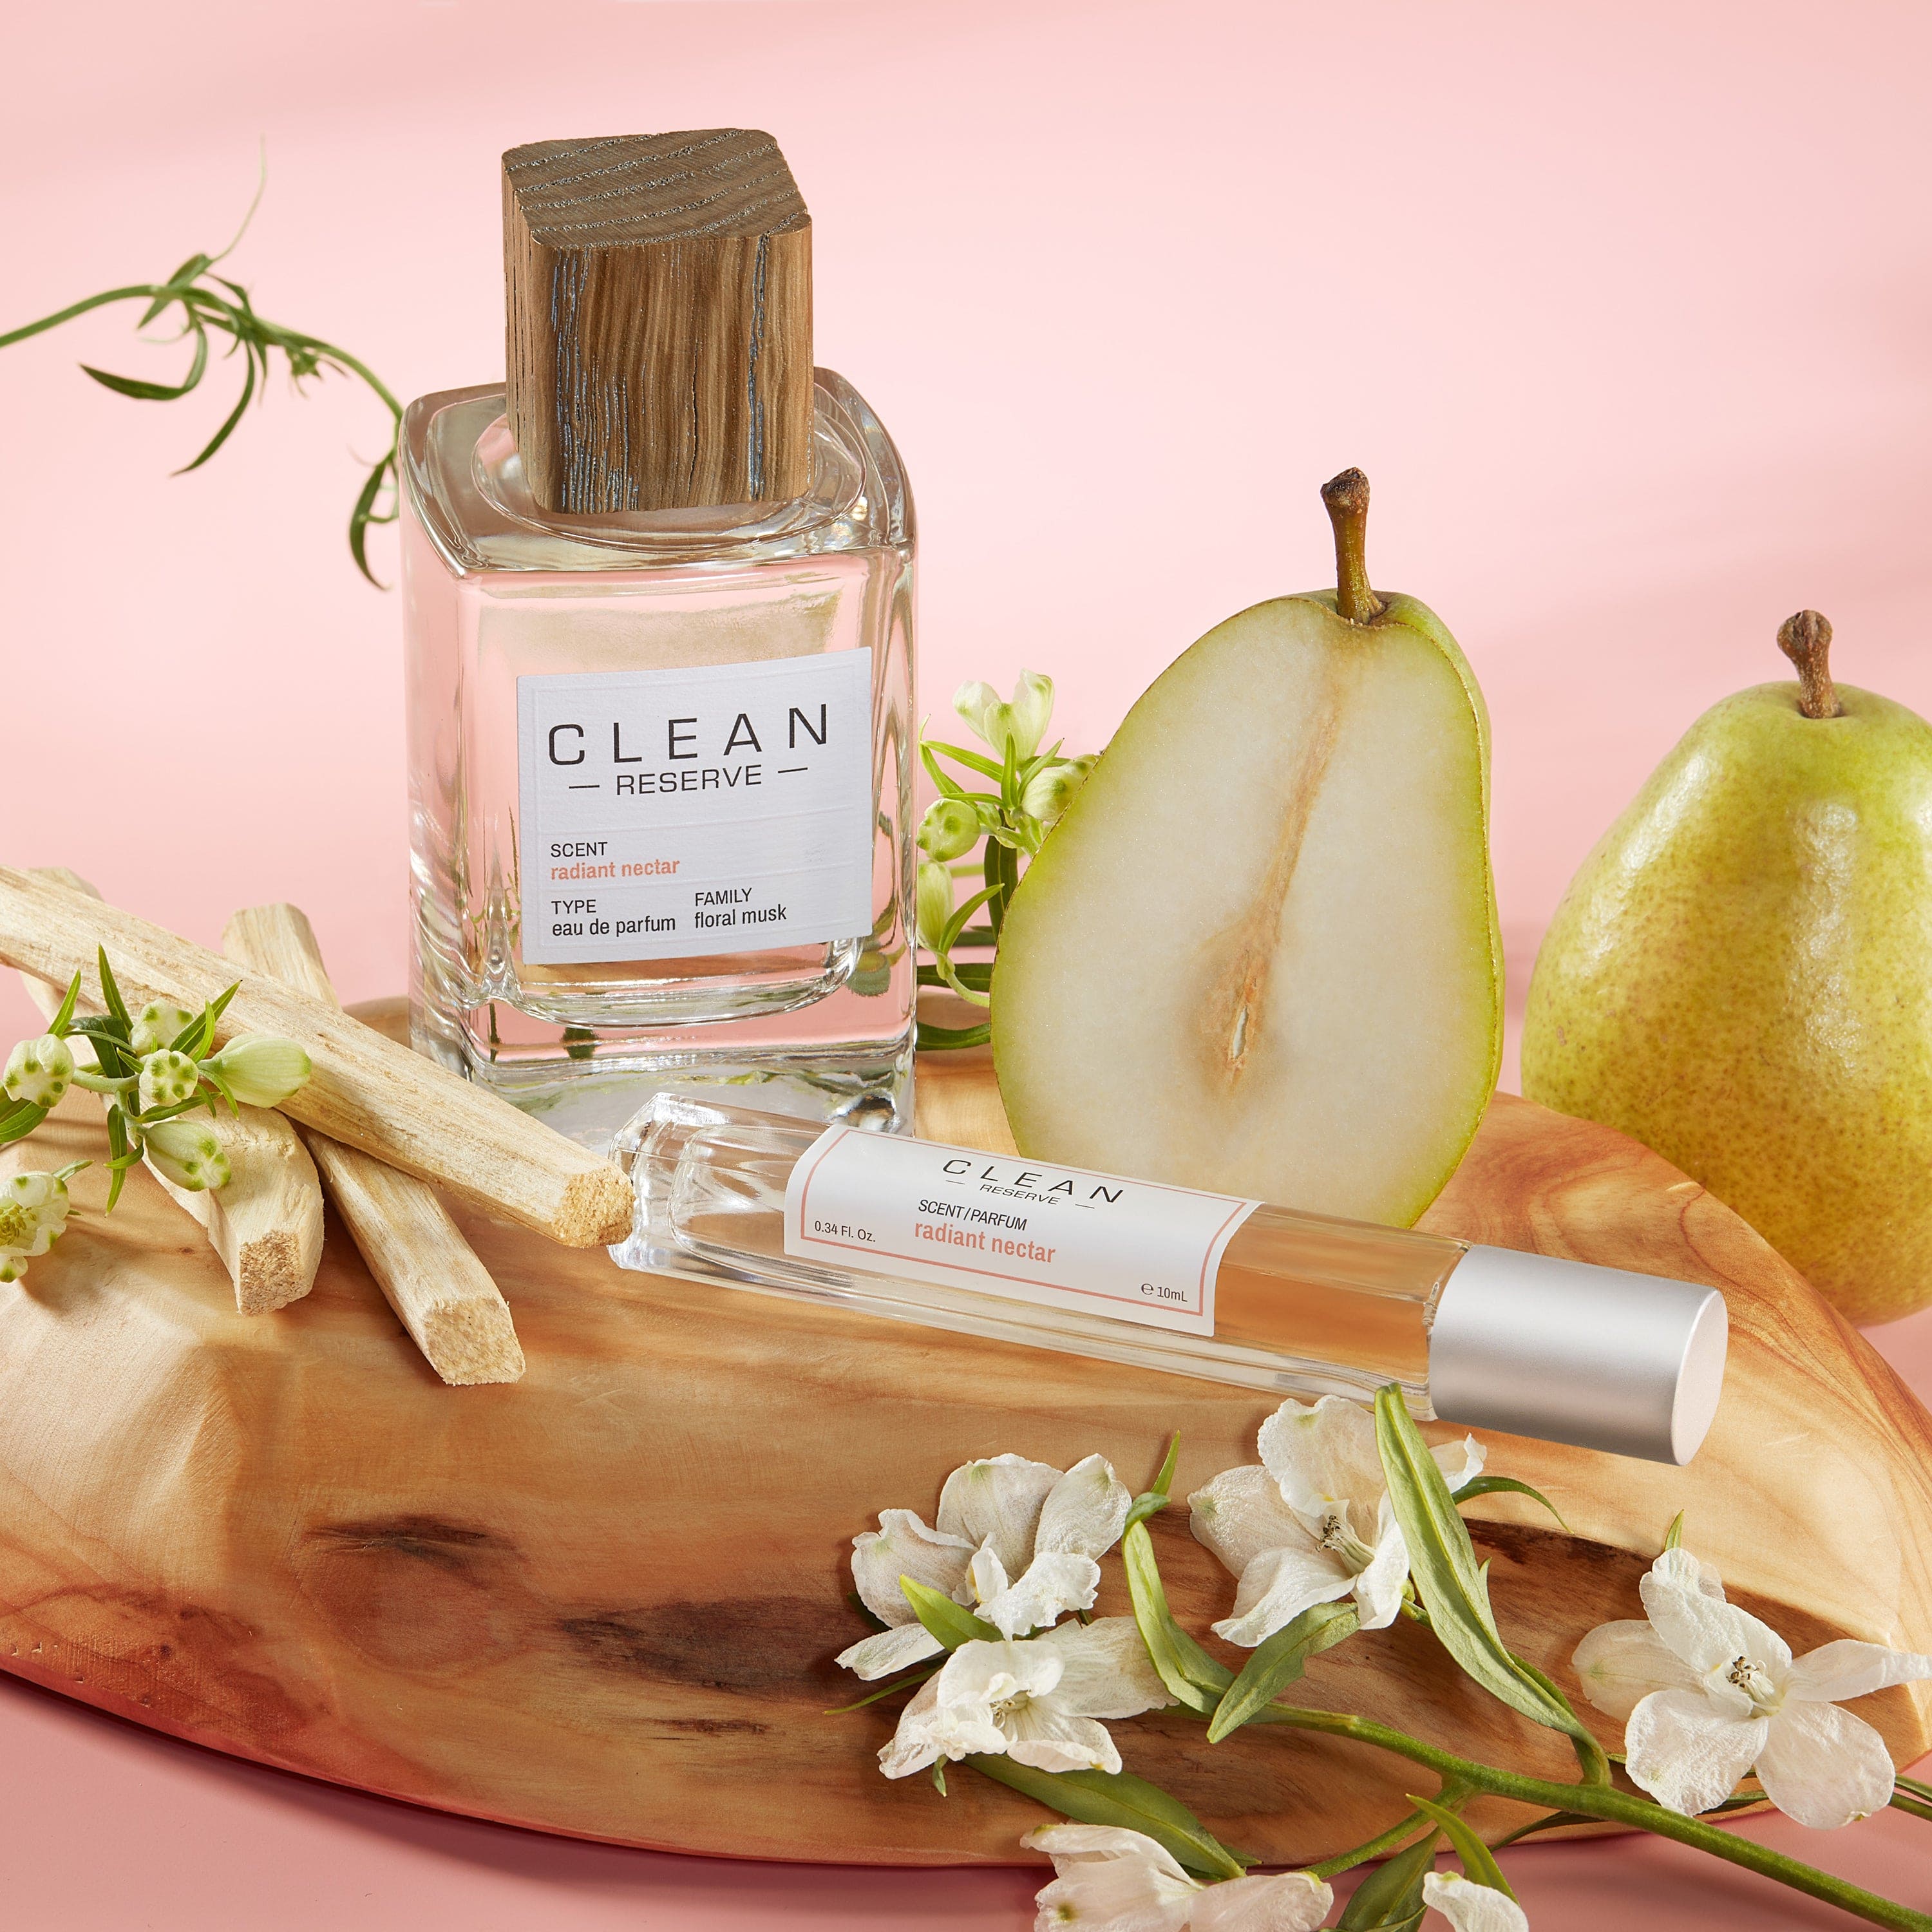 CLEAN-RESERVE- radiant nectar